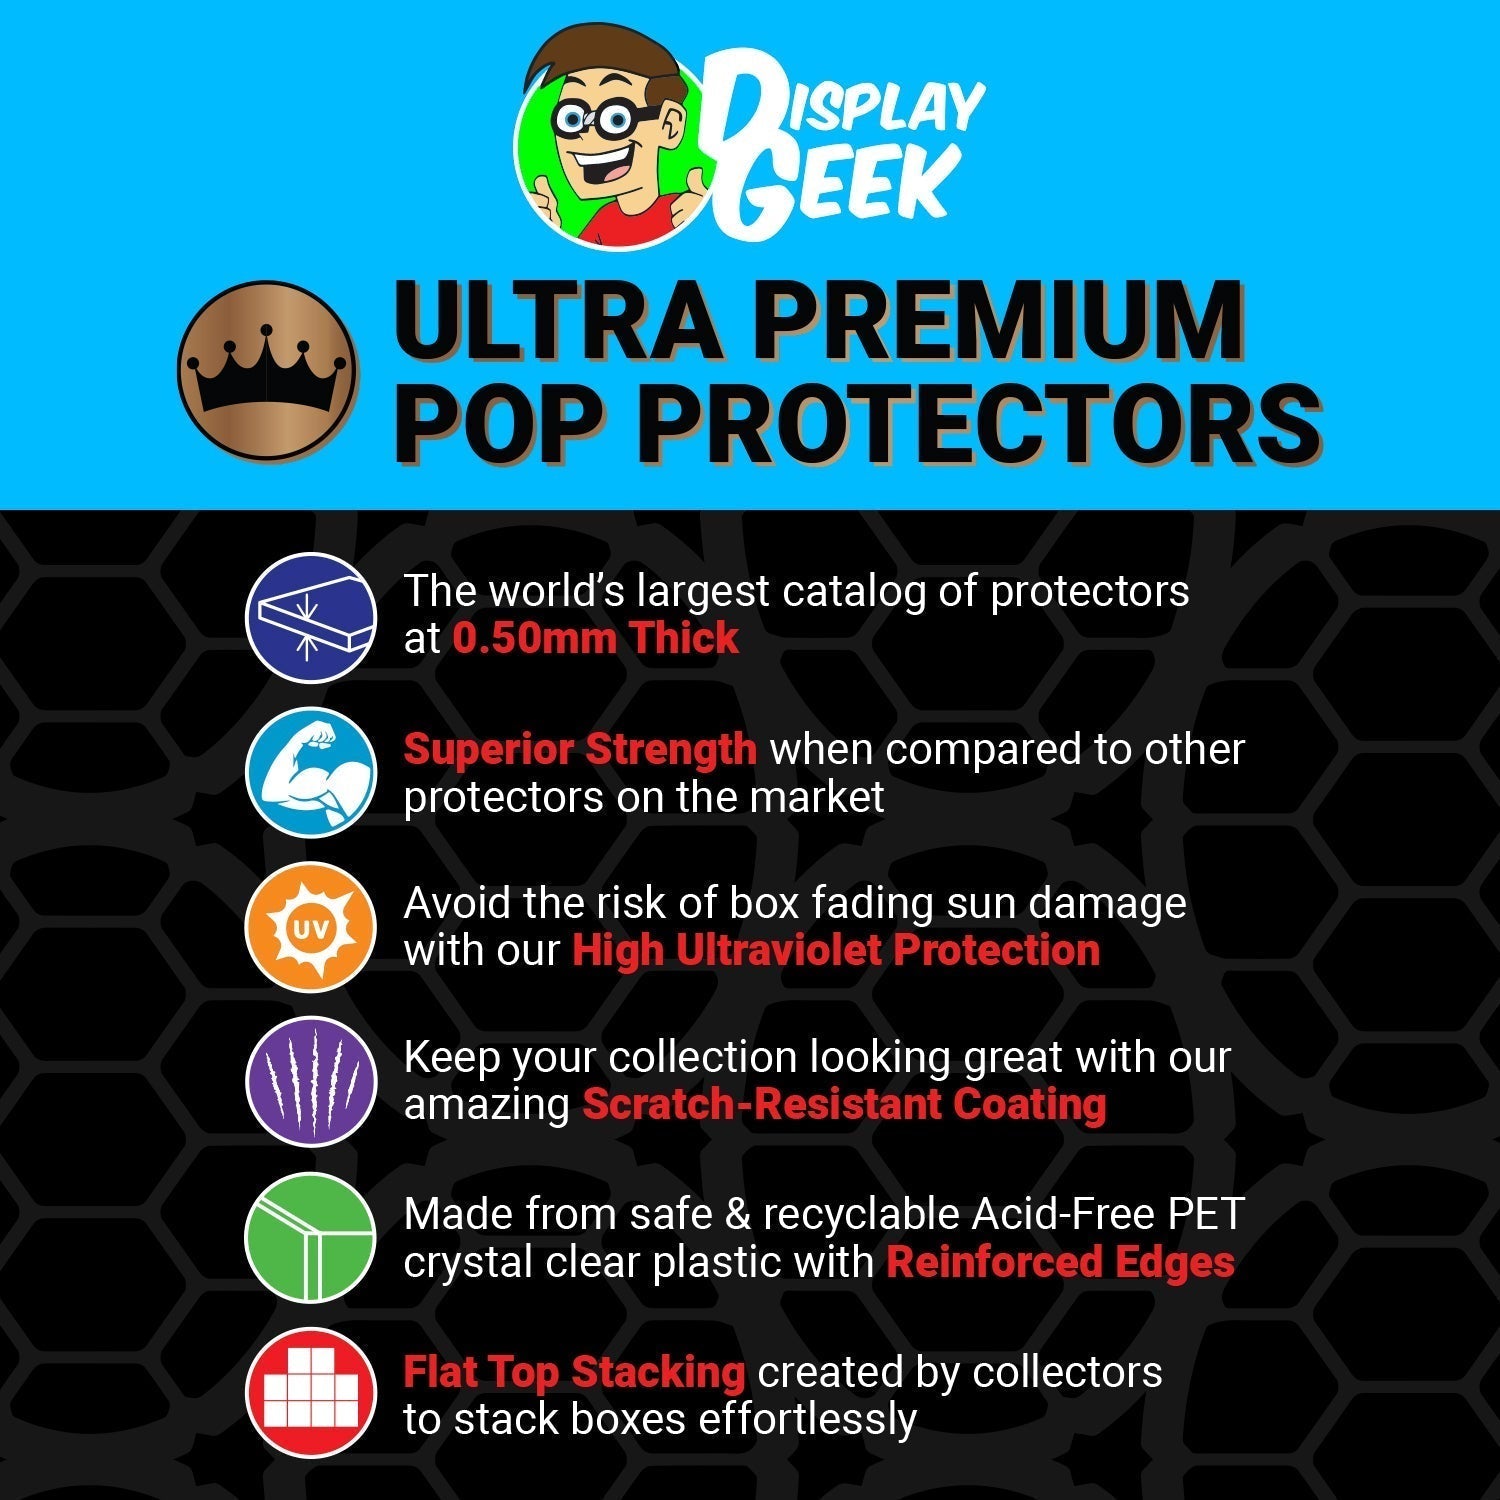 Pop Protector for Elvis Pure Gold #10 Funko Pop Albums - PPG Pop Protector Guide Search Created by Display Geek